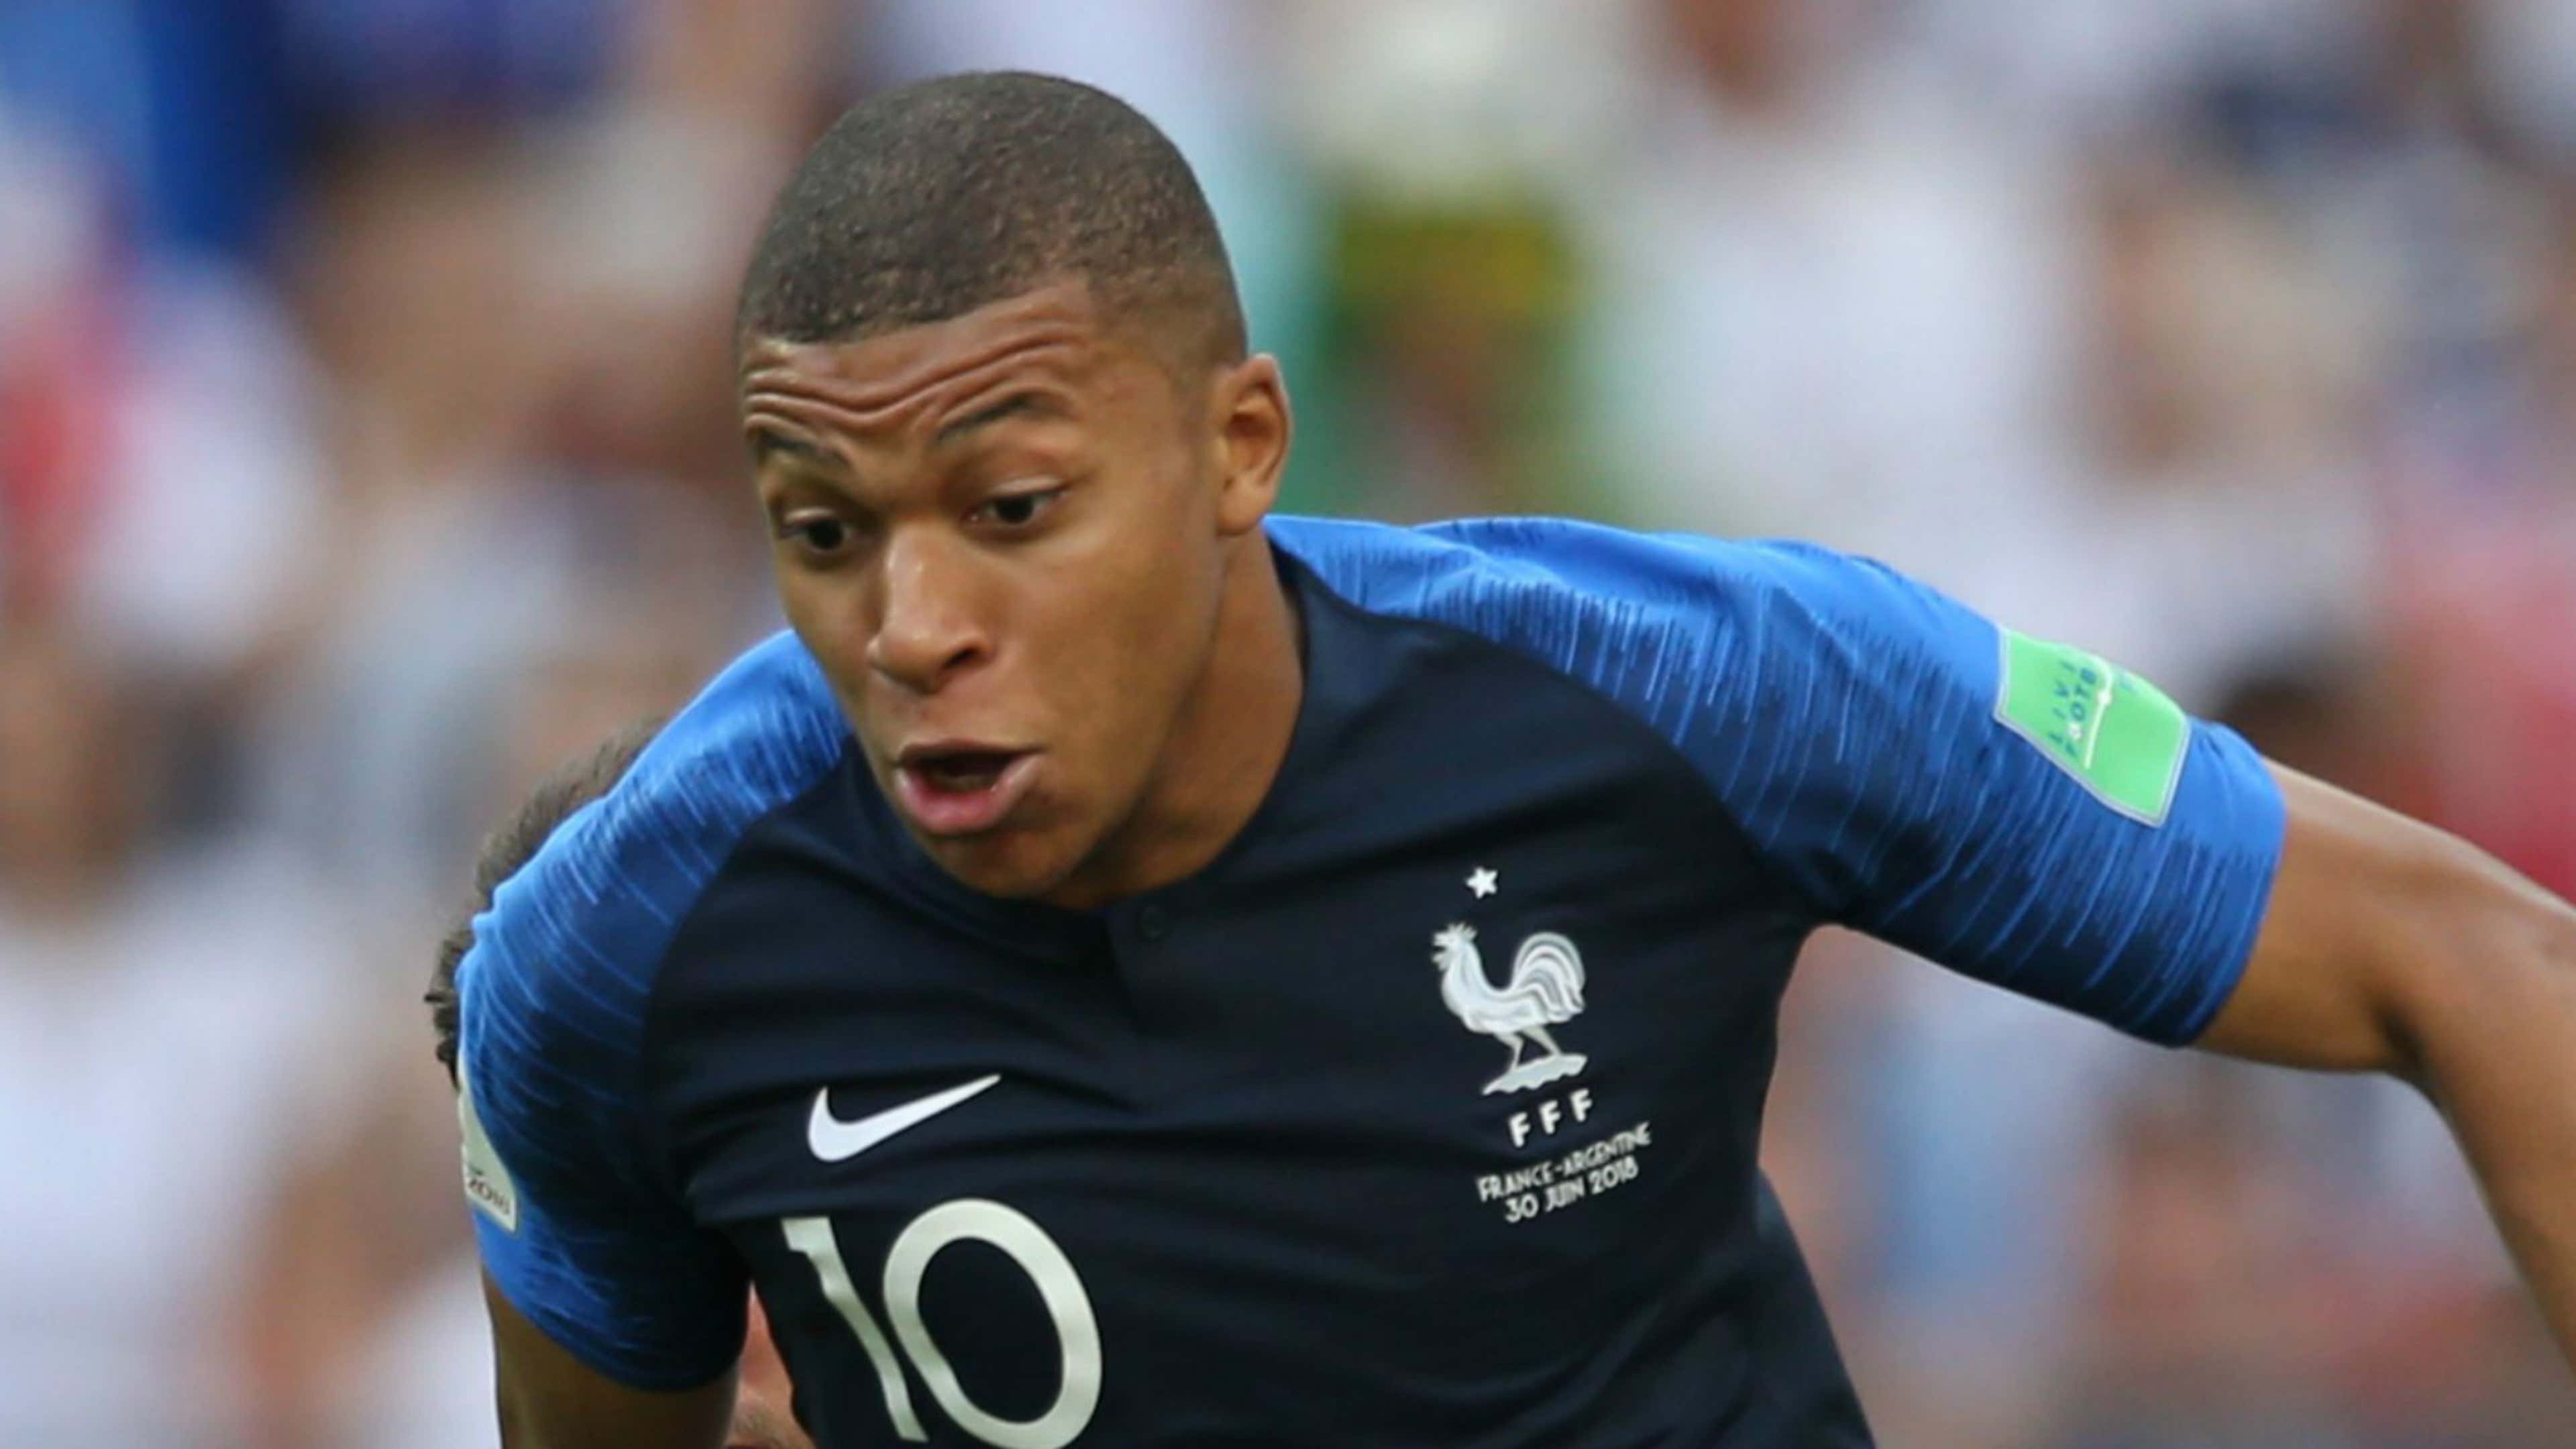 Kylian Mbappé tells Sports Illustrated he considered quitting